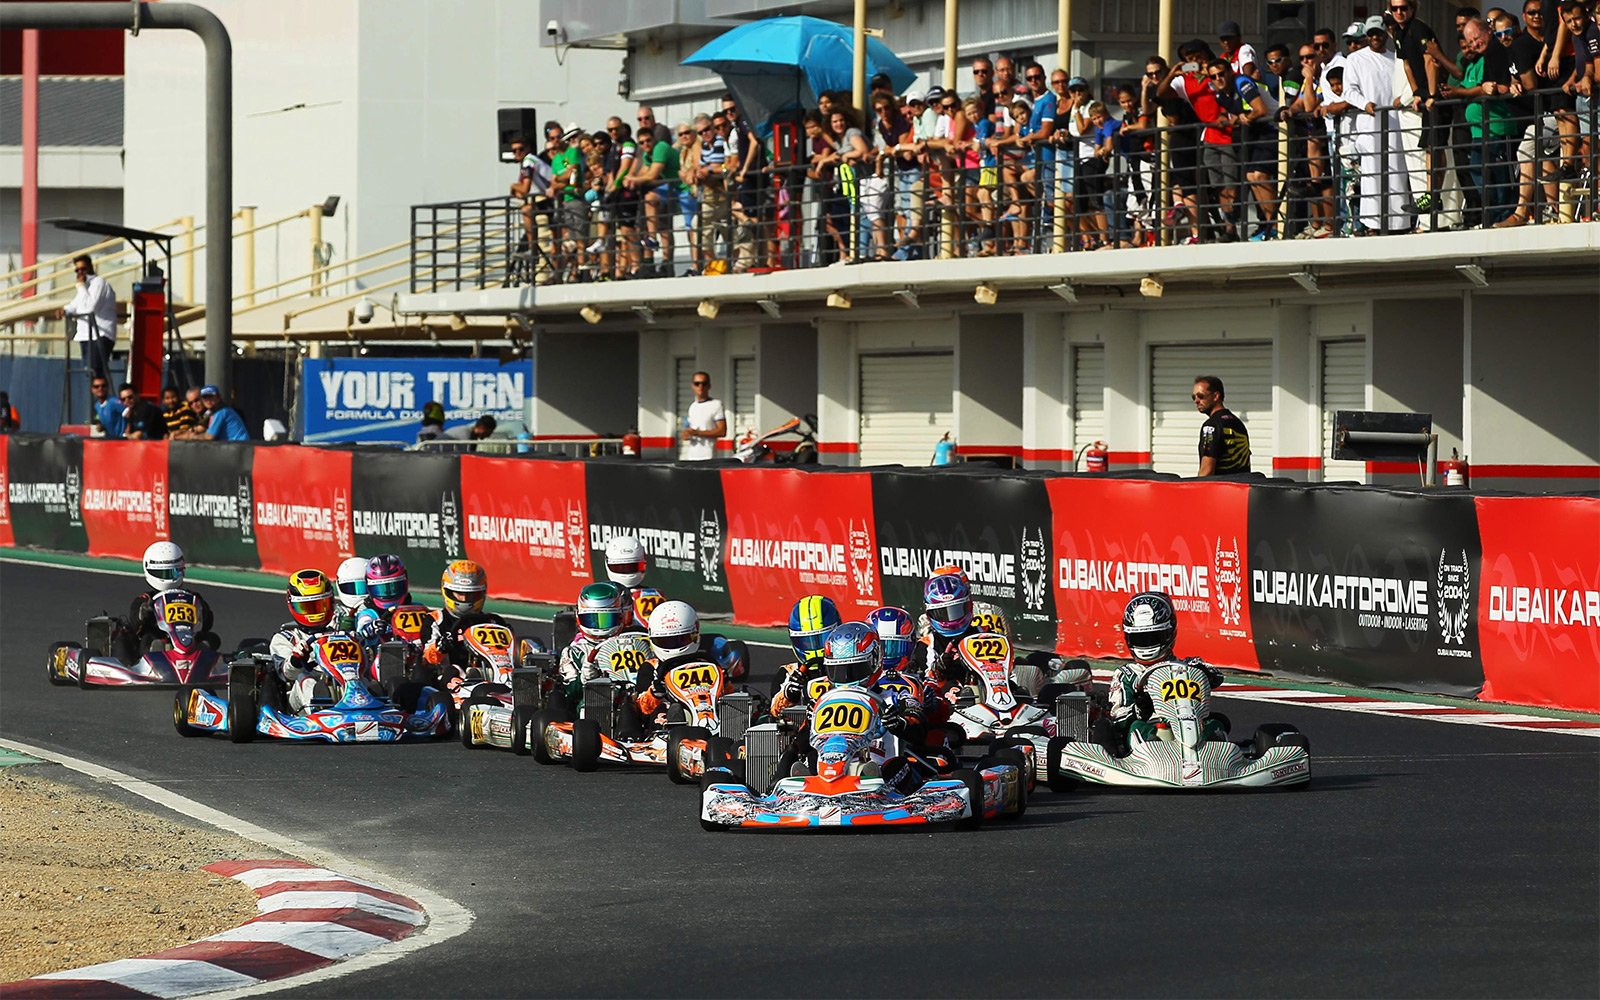 How to see the Rotax MAX Challenge in Al Ain